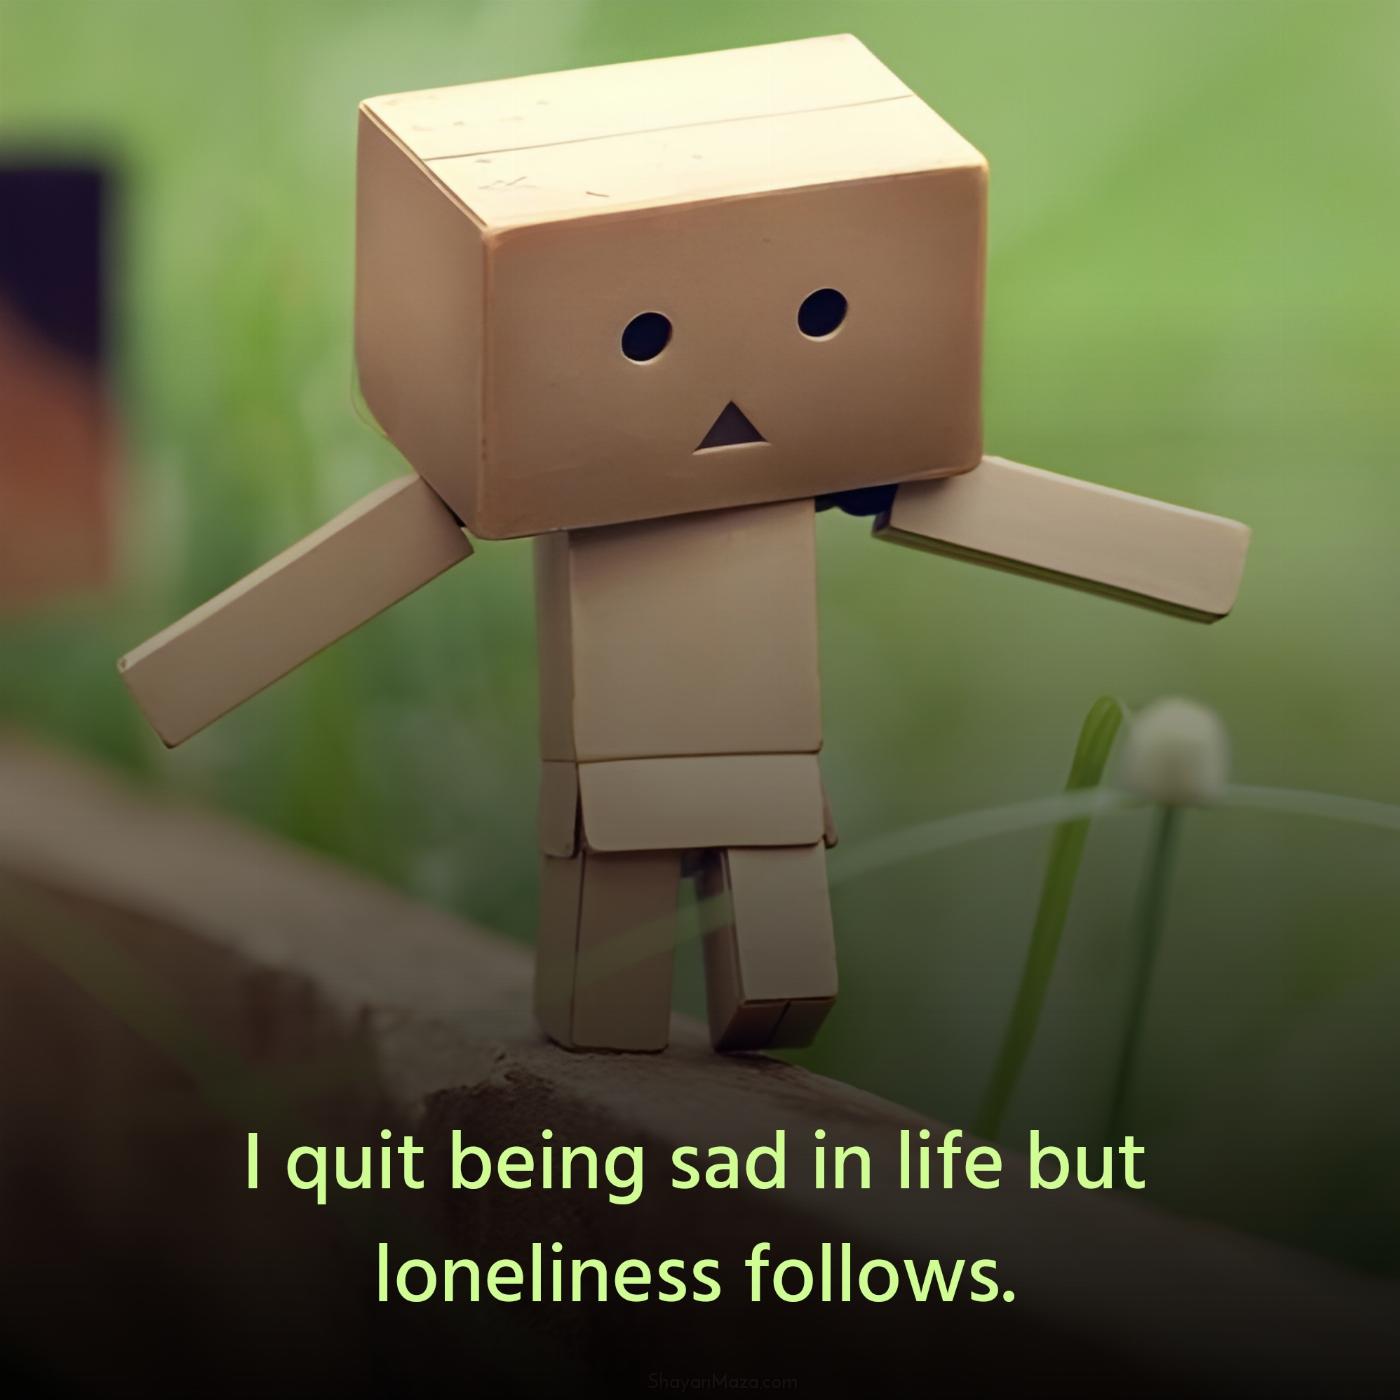 I quit being sad in life but loneliness follows